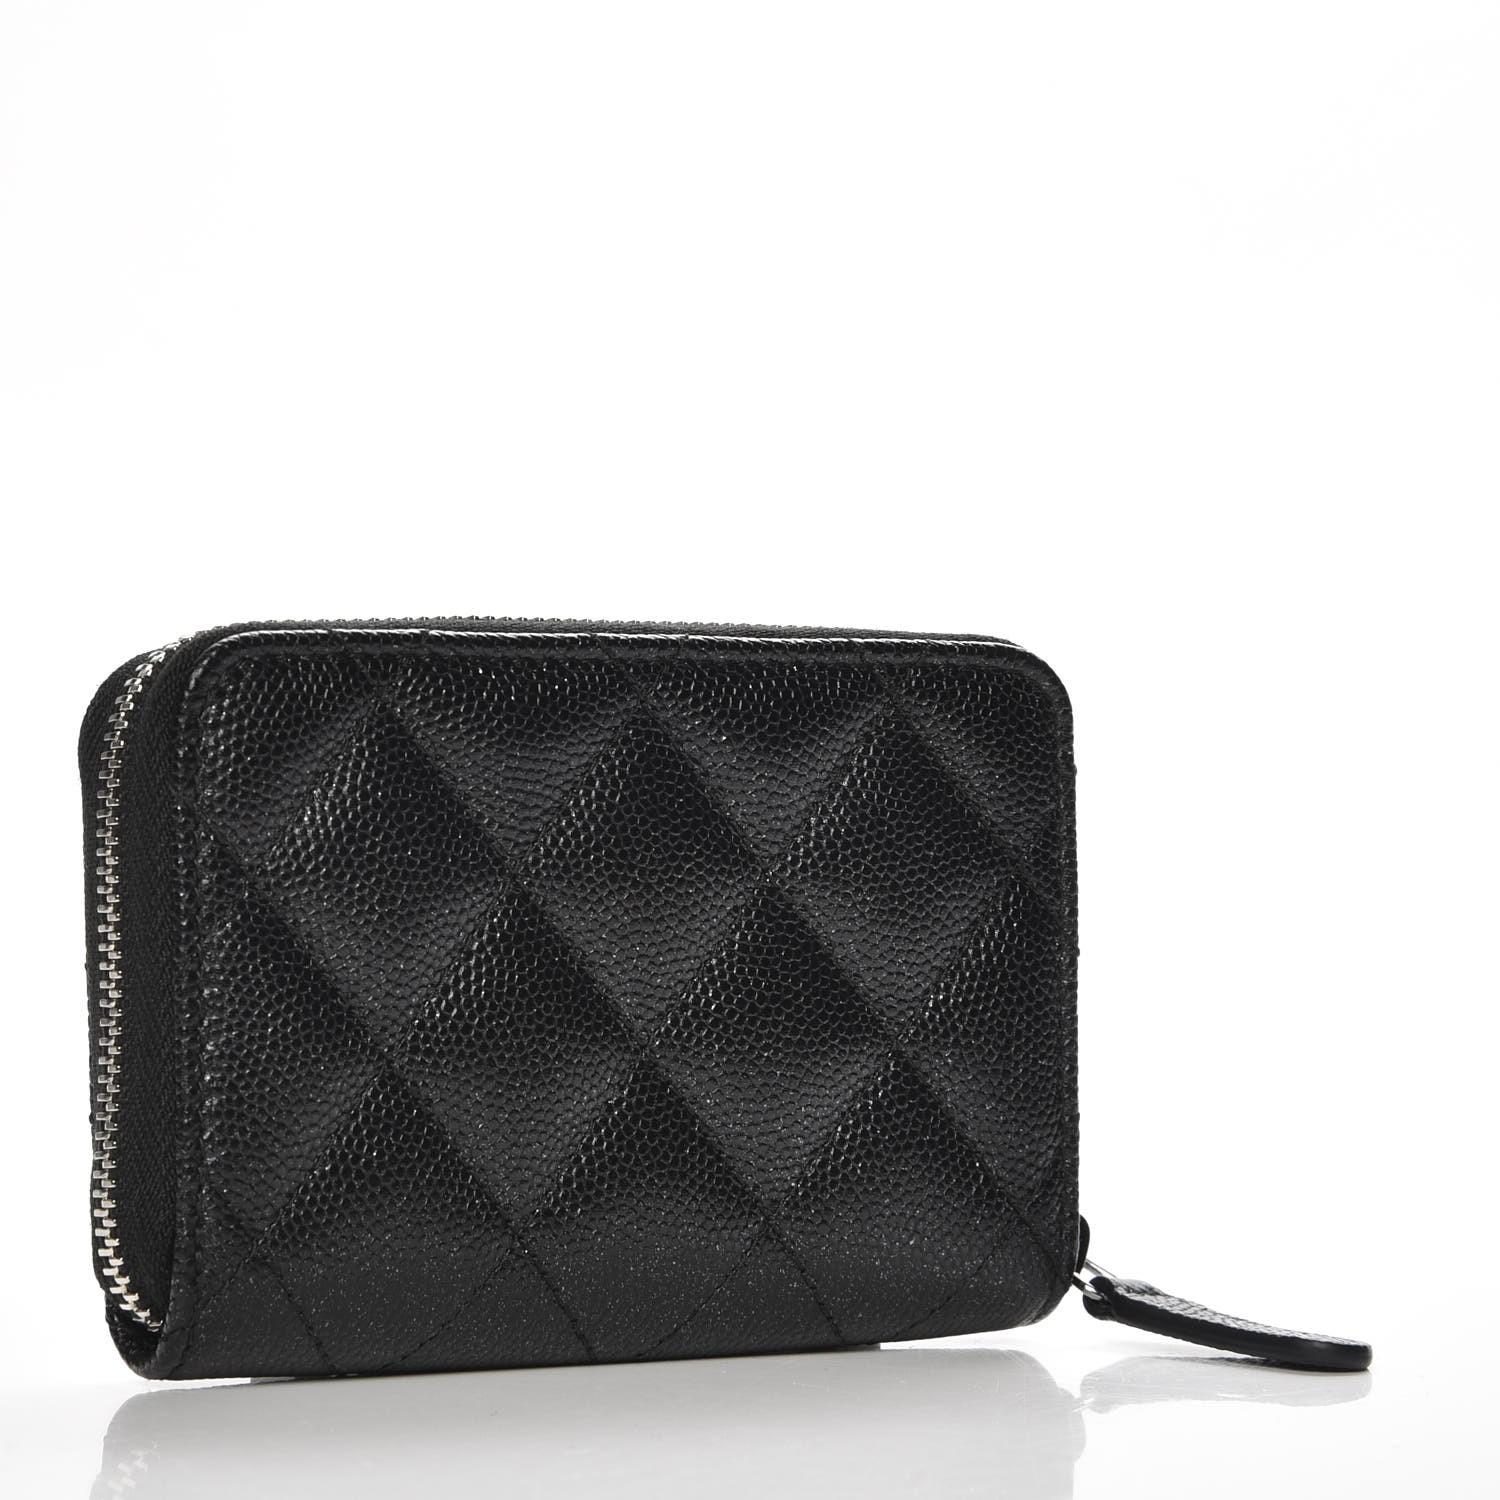 CHANEL Iridescent Caviar Quilted Zip Coin Purse Black 220826 | FASHIONPHILE